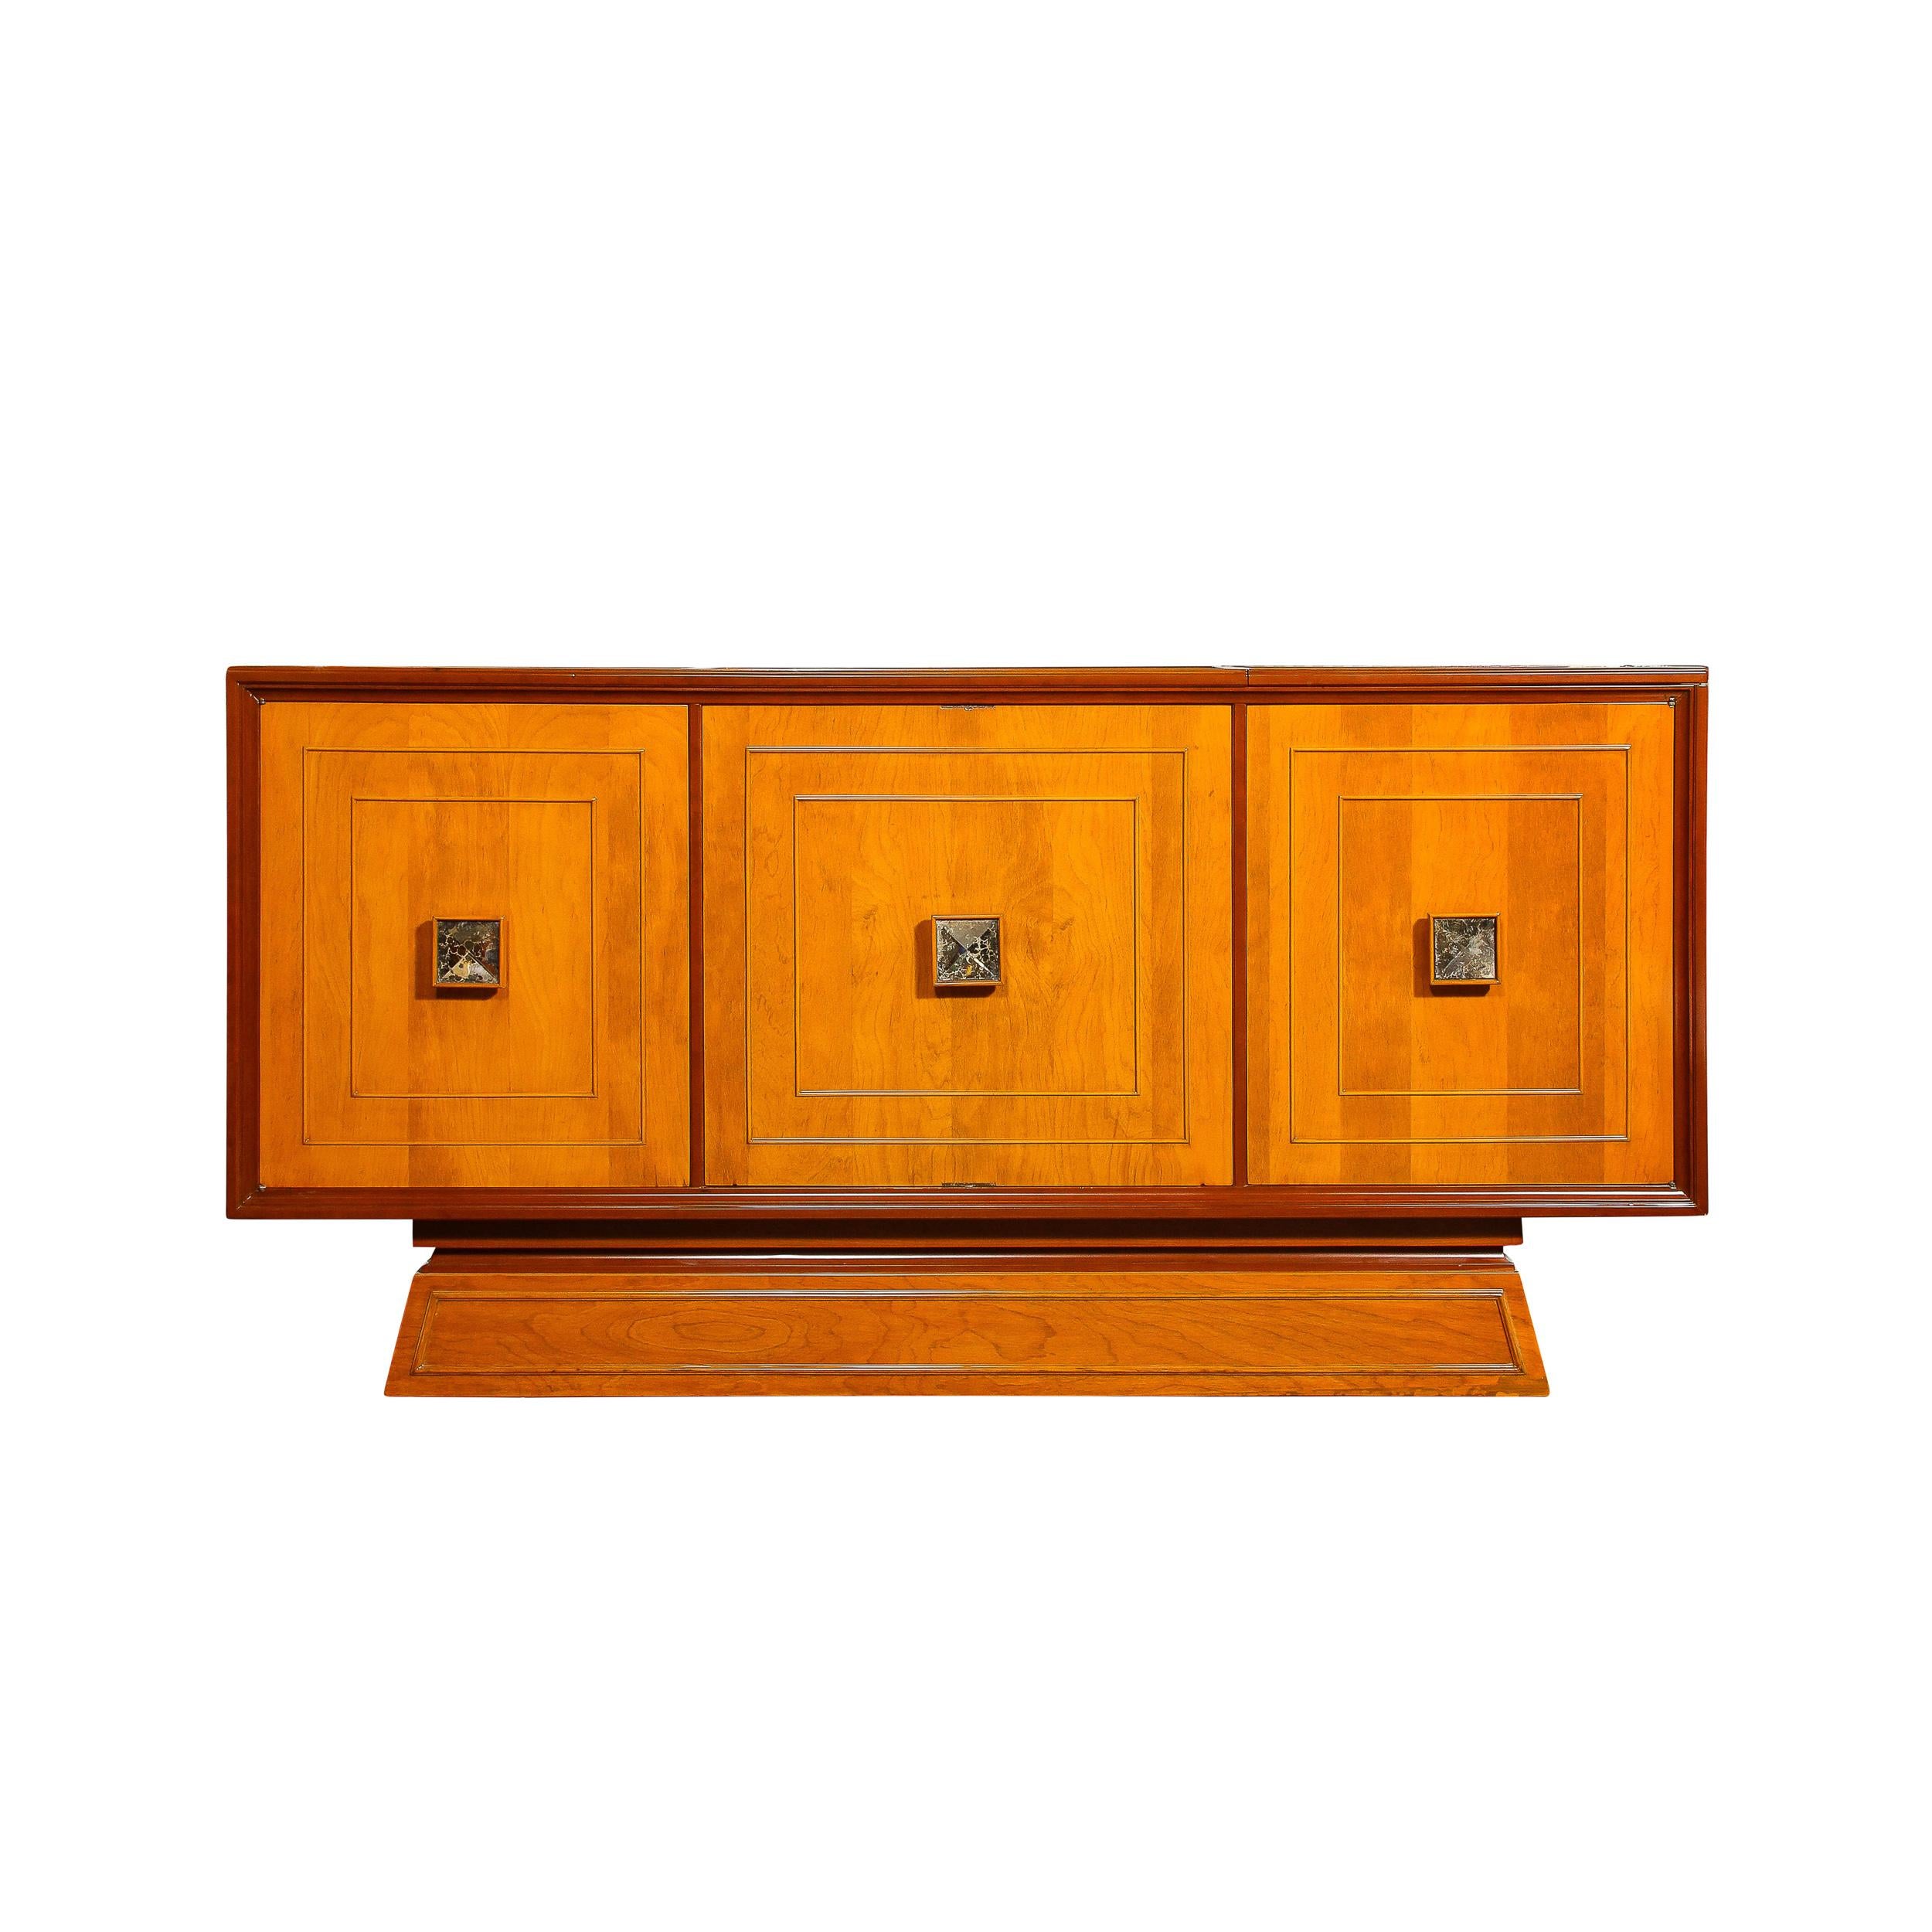 This stunningly bold and sophisticated Mid-Century Modernist Bar Cabinet in Bookmatched Walnut with Inset Antiqued mirrored Glass Pulls originates from France, Circa 1950. Features a rectilinear geometric design composed of three square sections